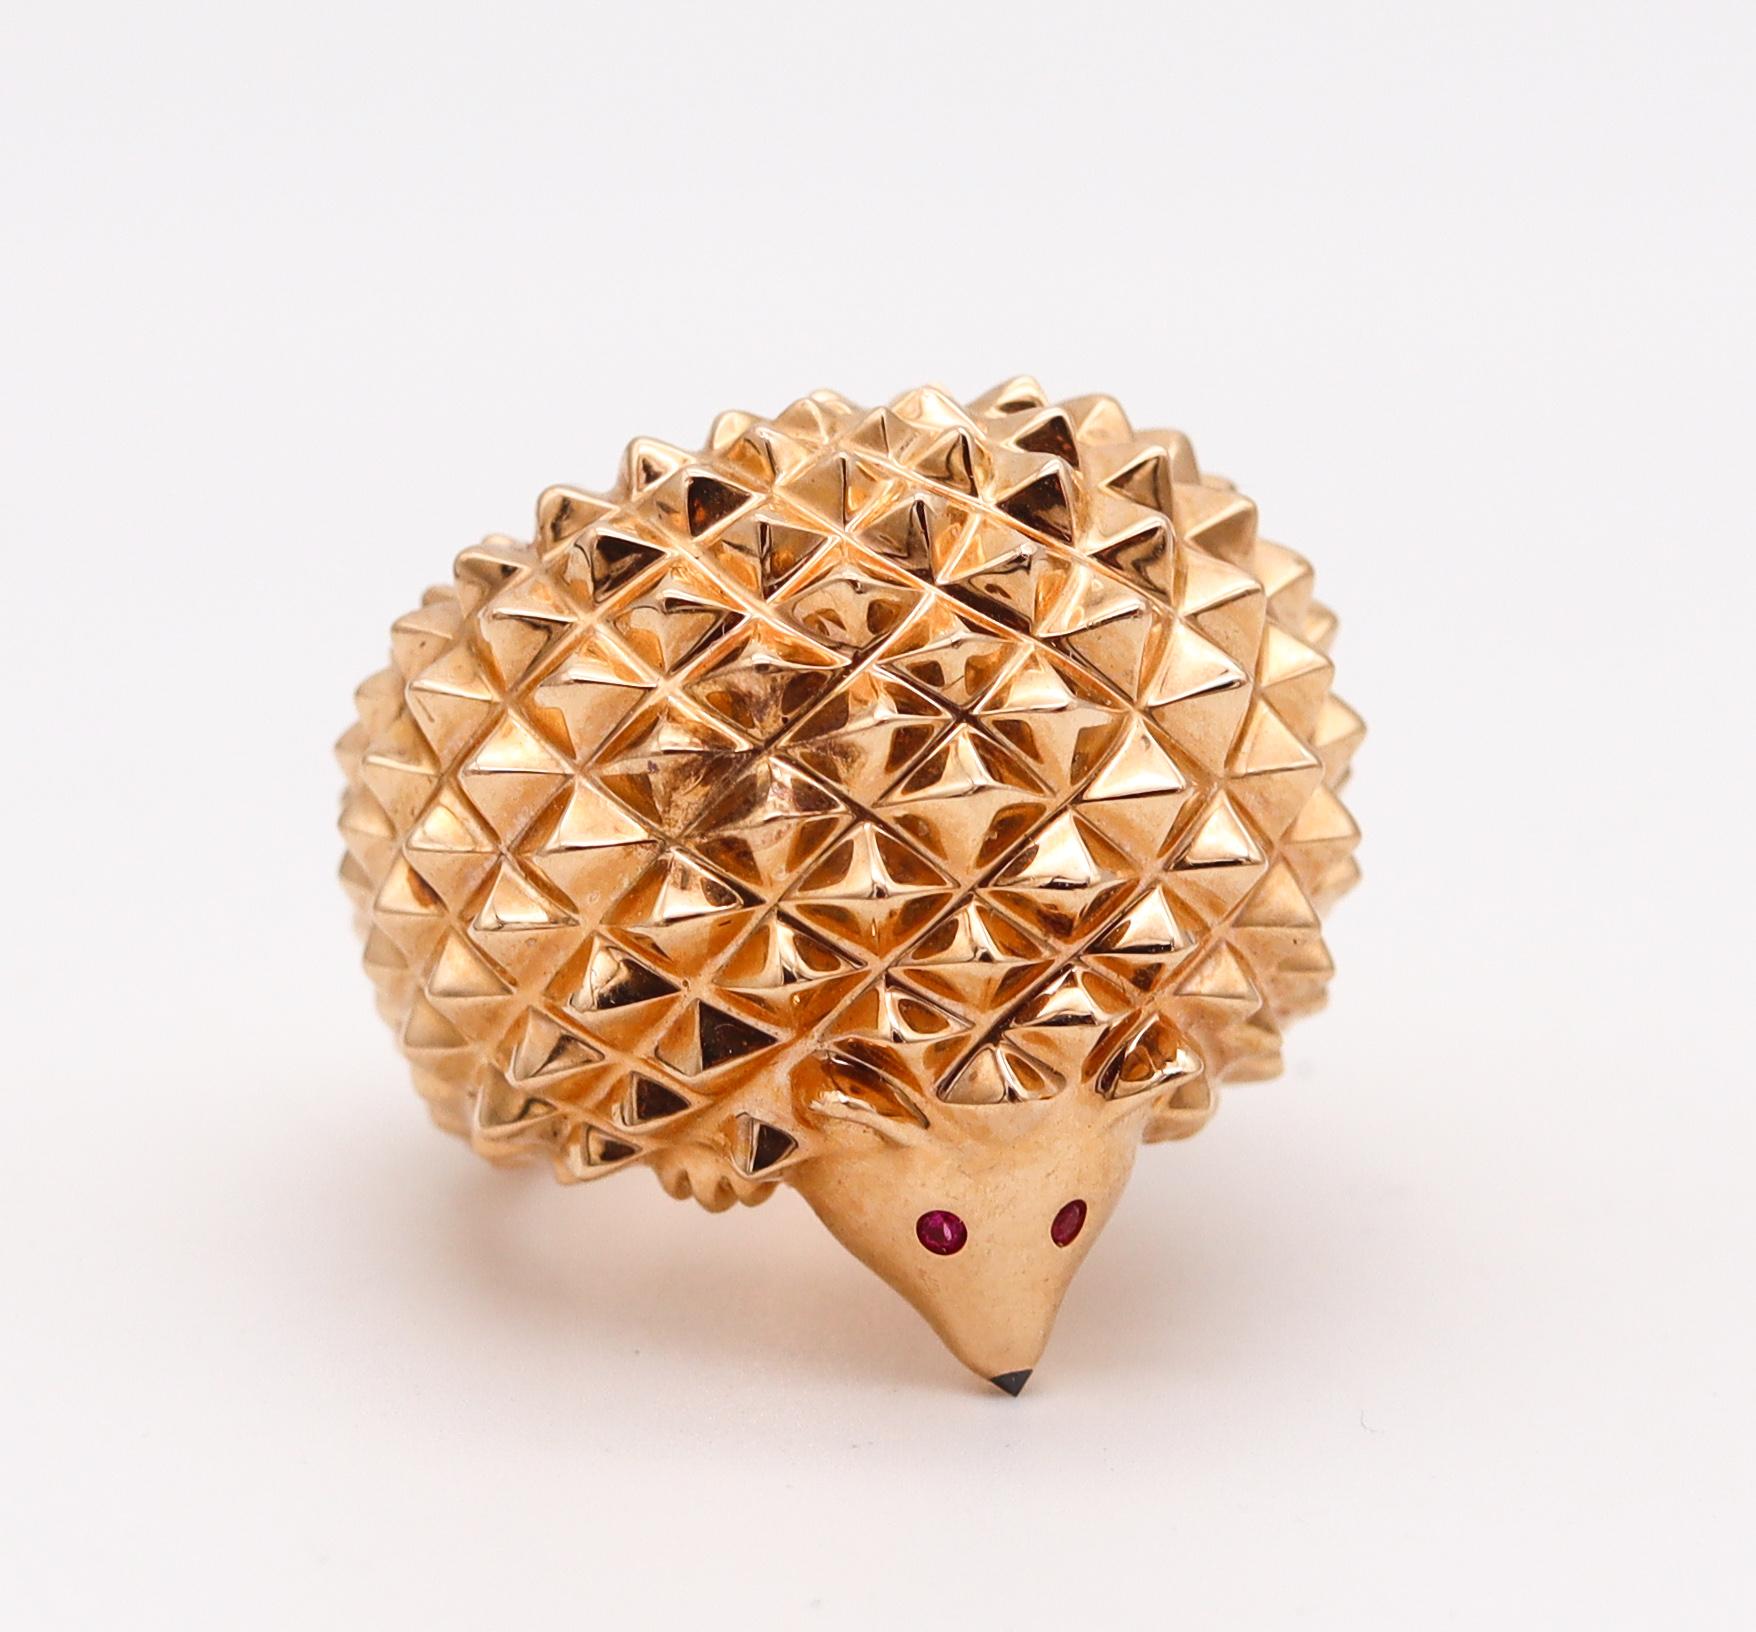  A porcupine ring designed by Boucheron.

Stunning modernist piece, created in Paris France by the jewelry house of Boucheron. This three-dimensional cocktail ring is the model of Hans, The Hedgehog and was carefully crafted in solid yellow gold of